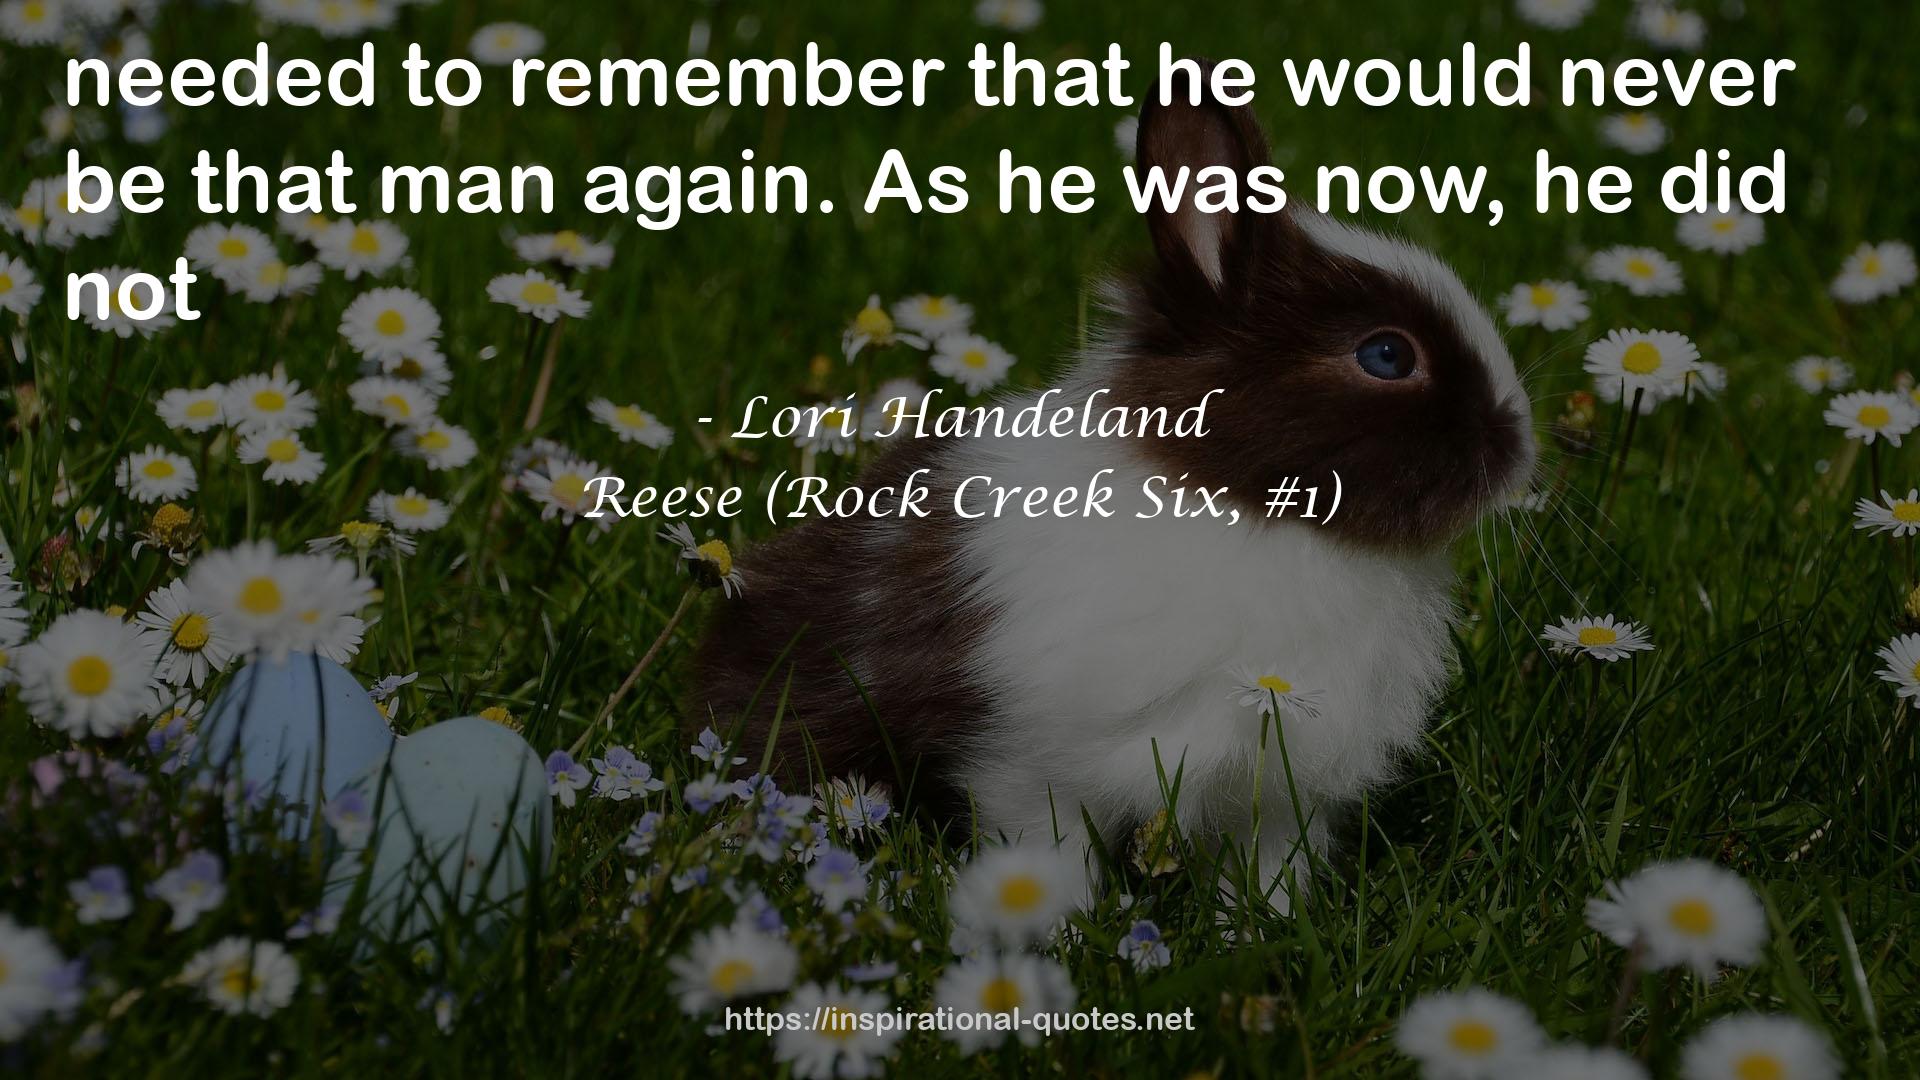 Reese (Rock Creek Six, #1) QUOTES